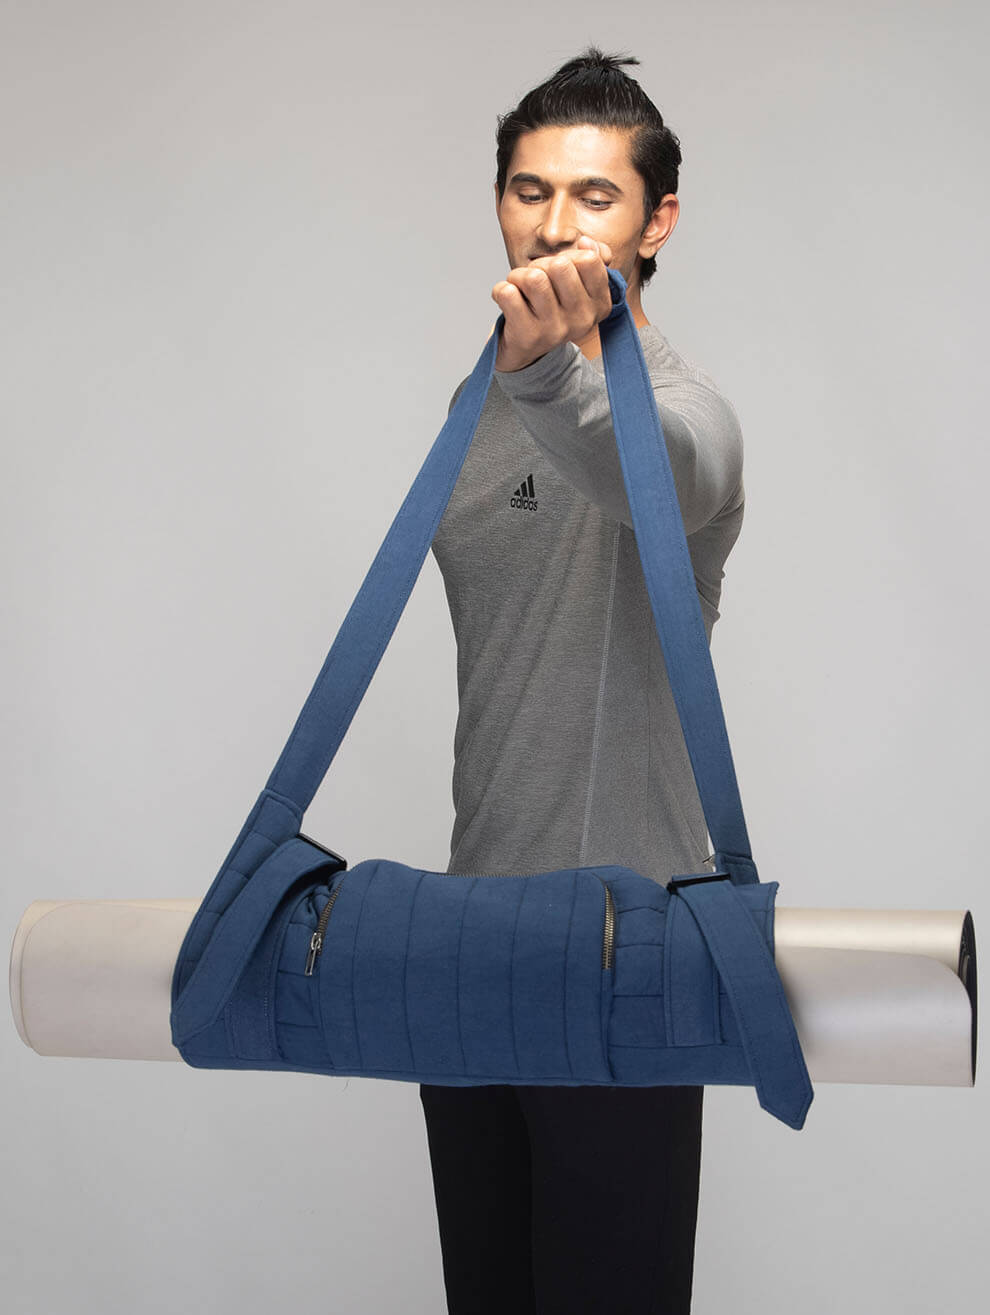 Best Yoga Mat Bags to Buy on